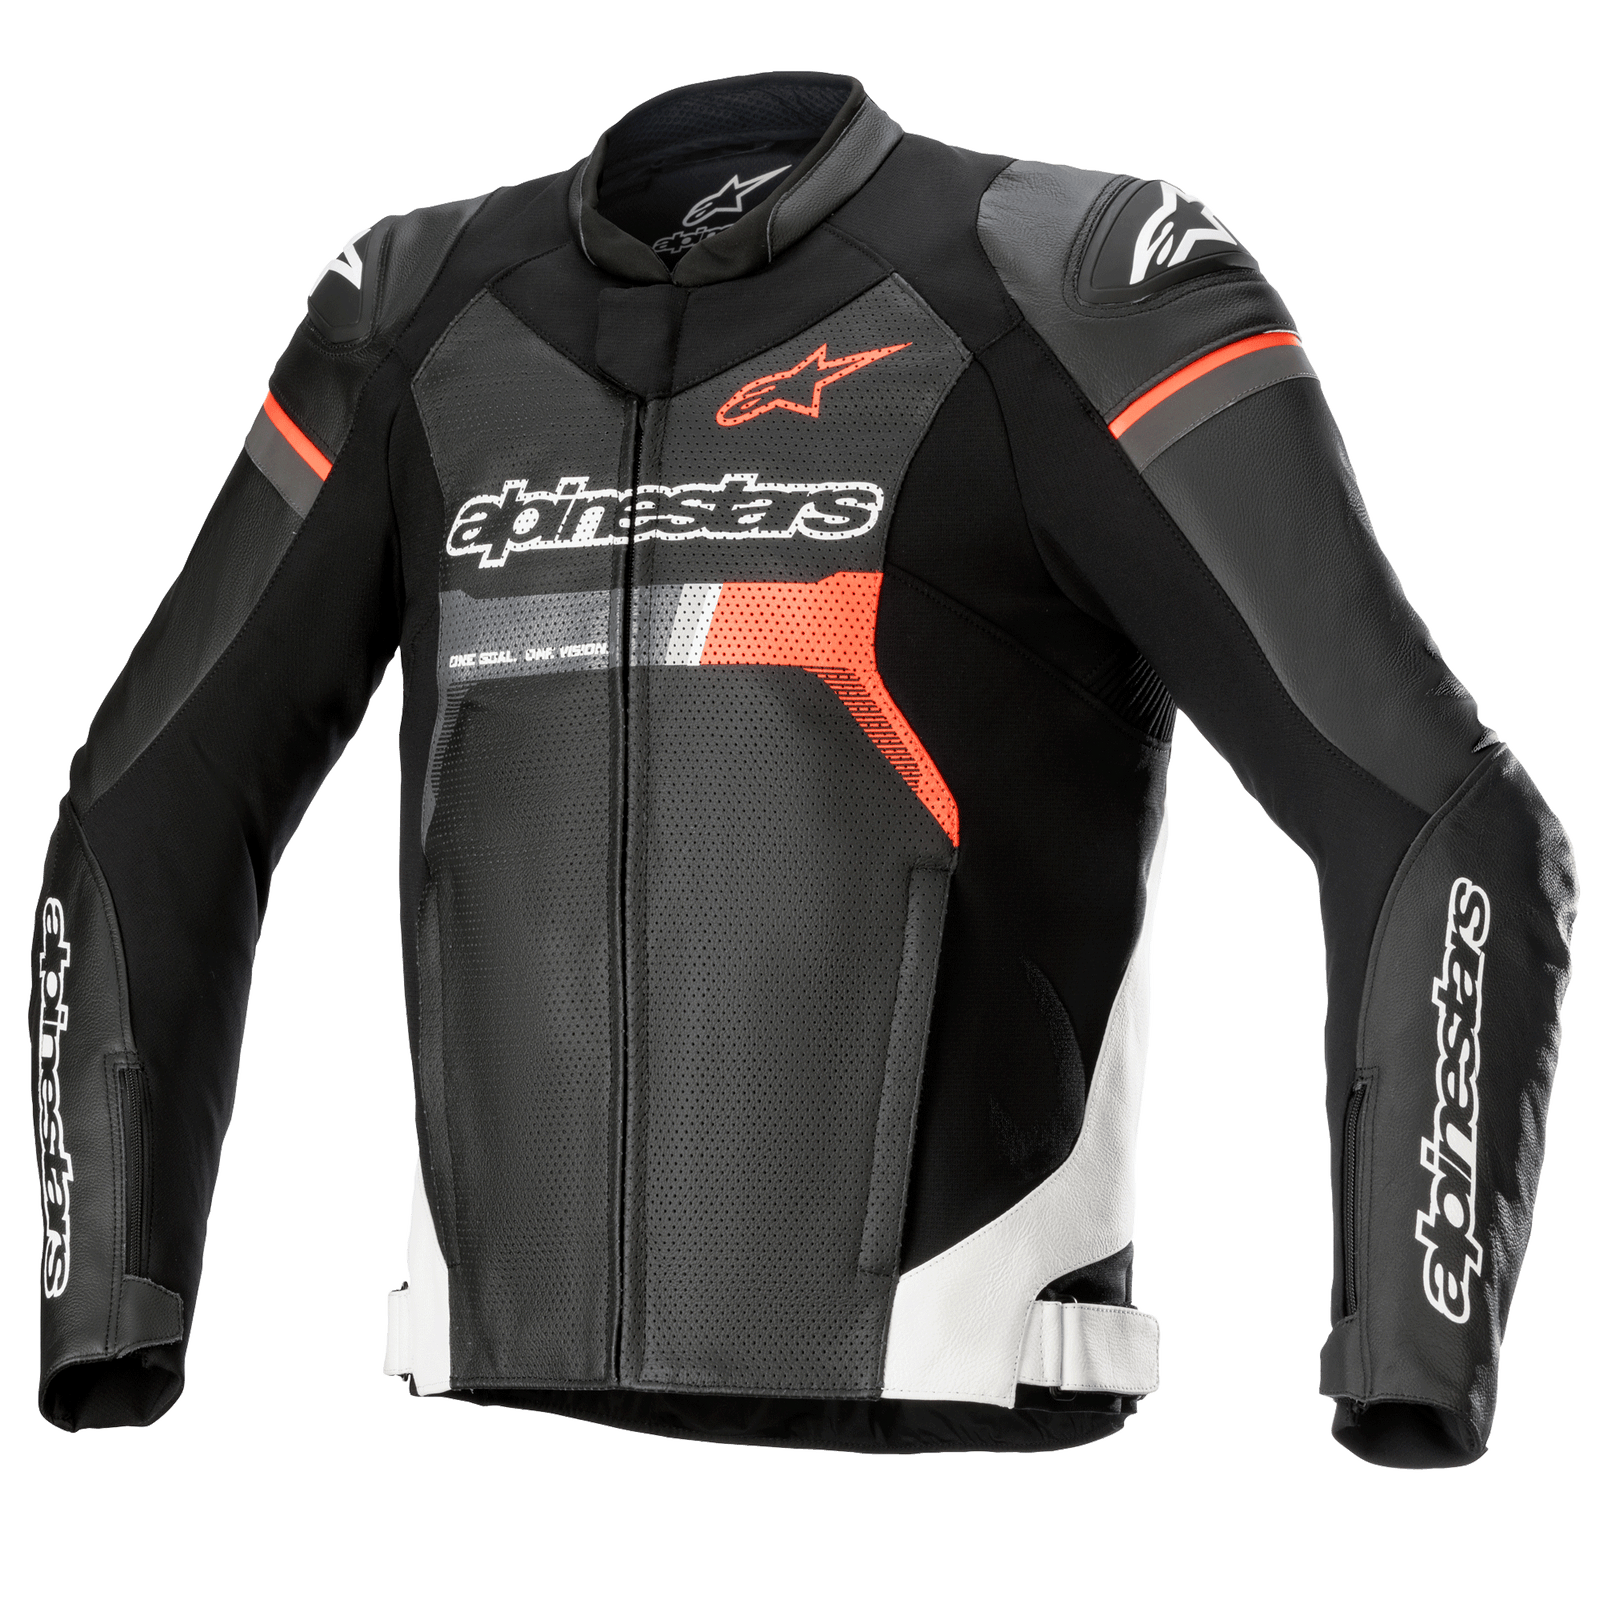 GP Force Airflow Leather Chaqueta